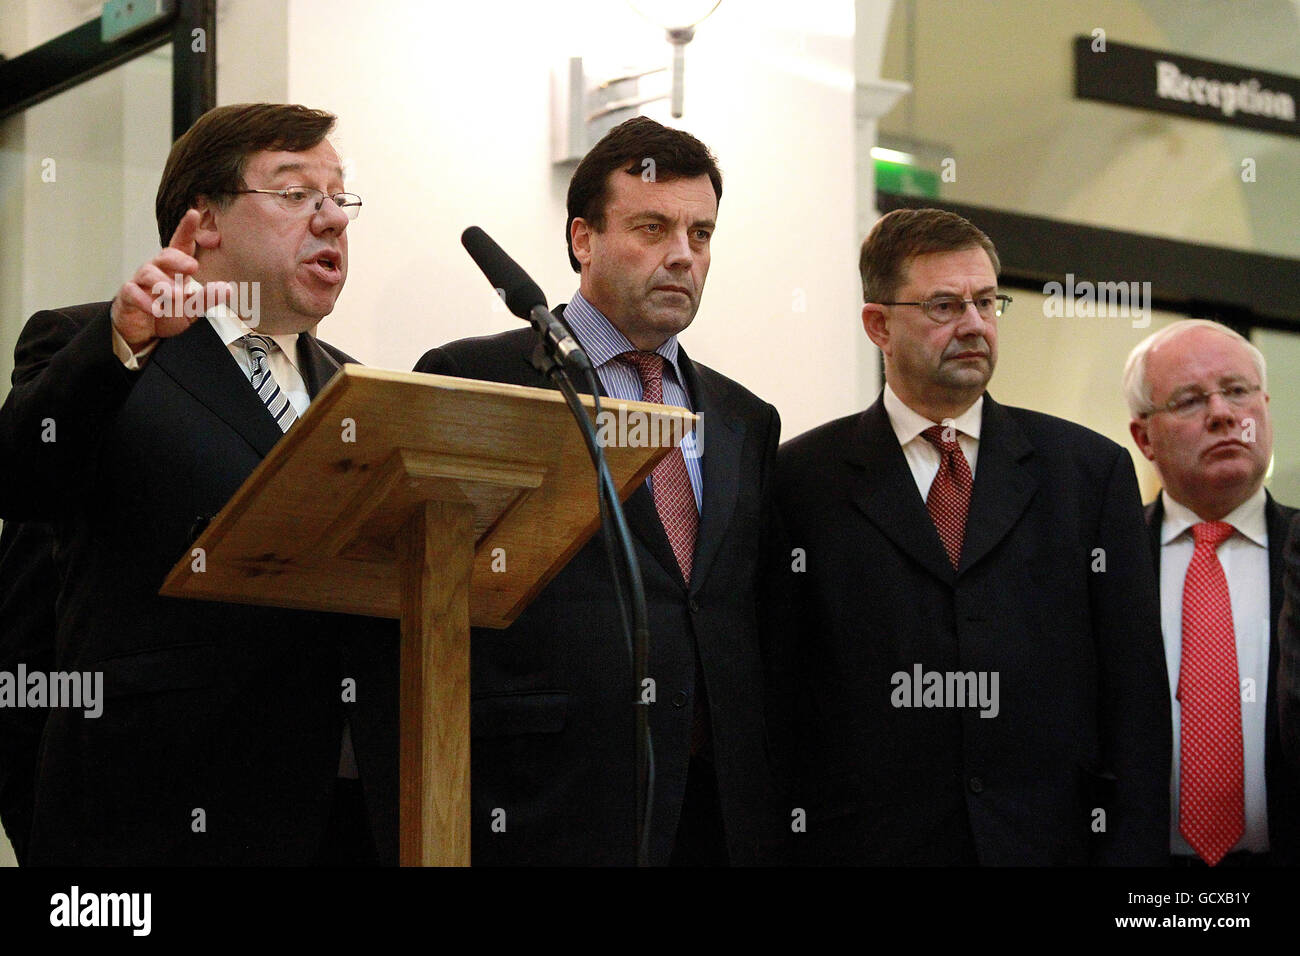 Irish Taoiseach Brian Cowen, with his front bench colleagues, after giving a statement to the waiting media on the steps of Government Buildings in Dublin, where refused to bow to public and political pressure for a general election saying serving the country's interests came above party politics. Stock Photo